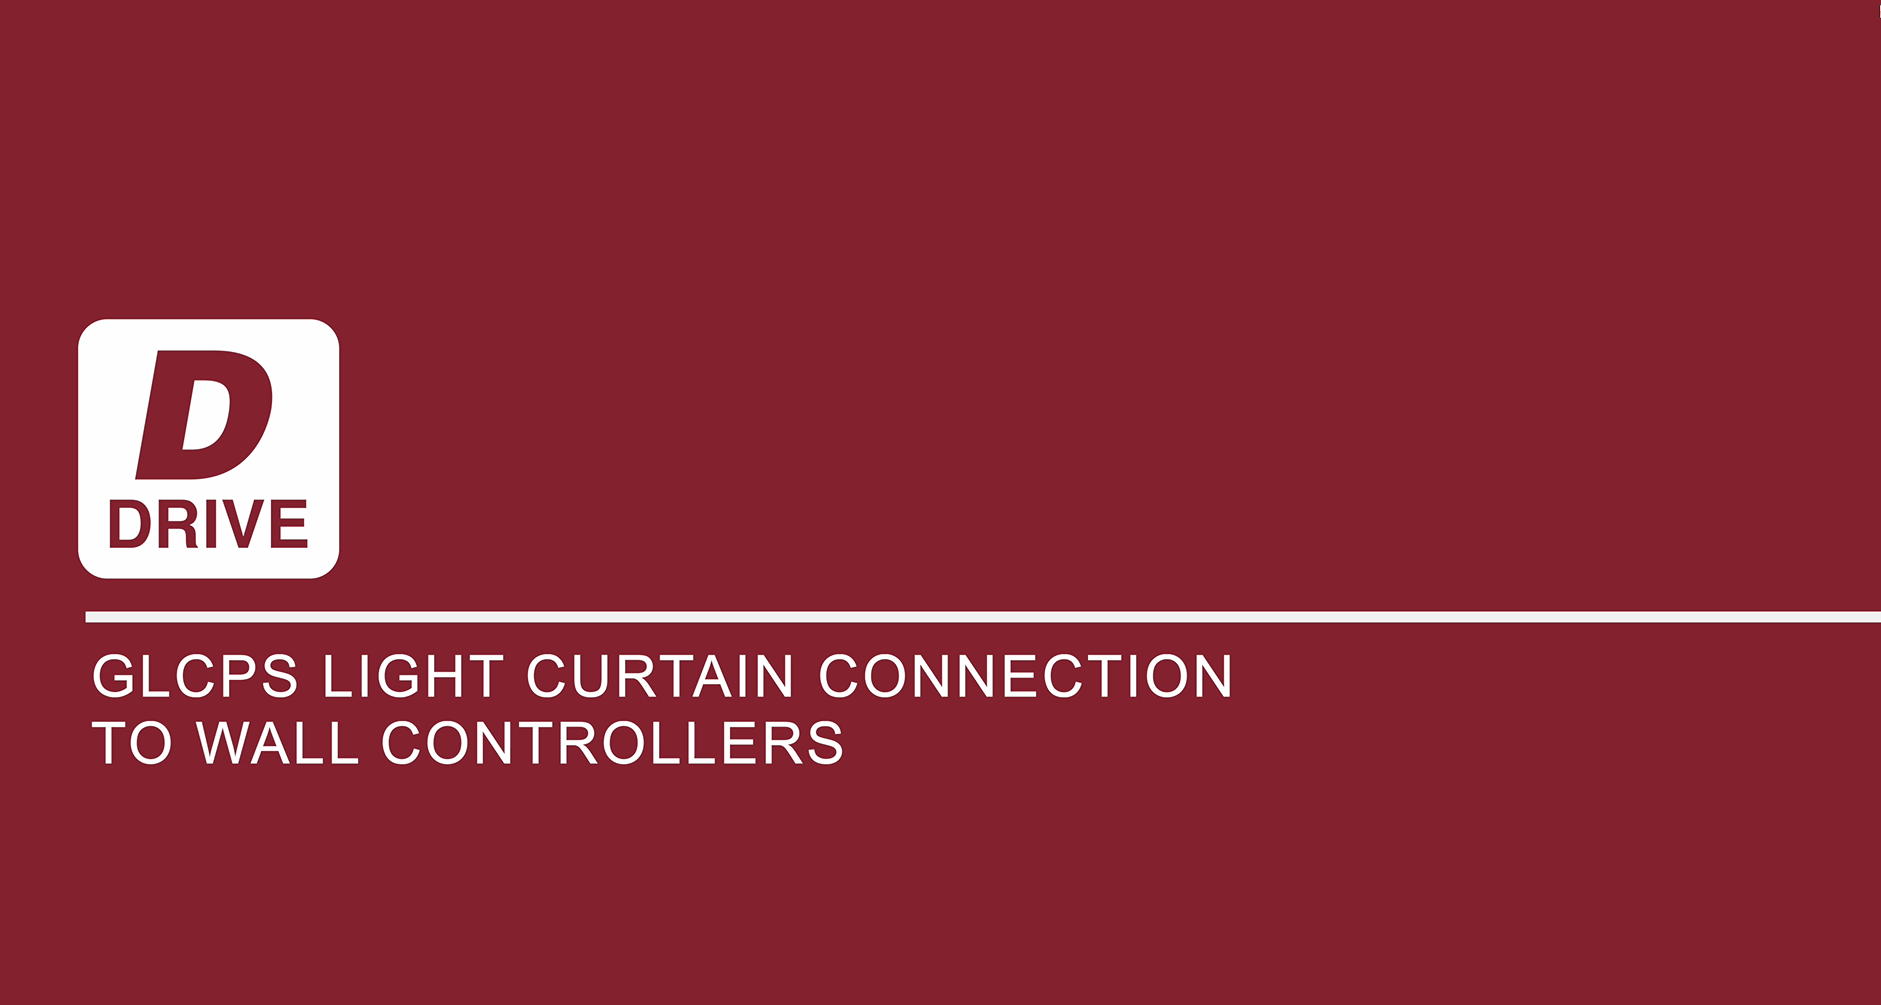 Light curtain connection to wall controllers